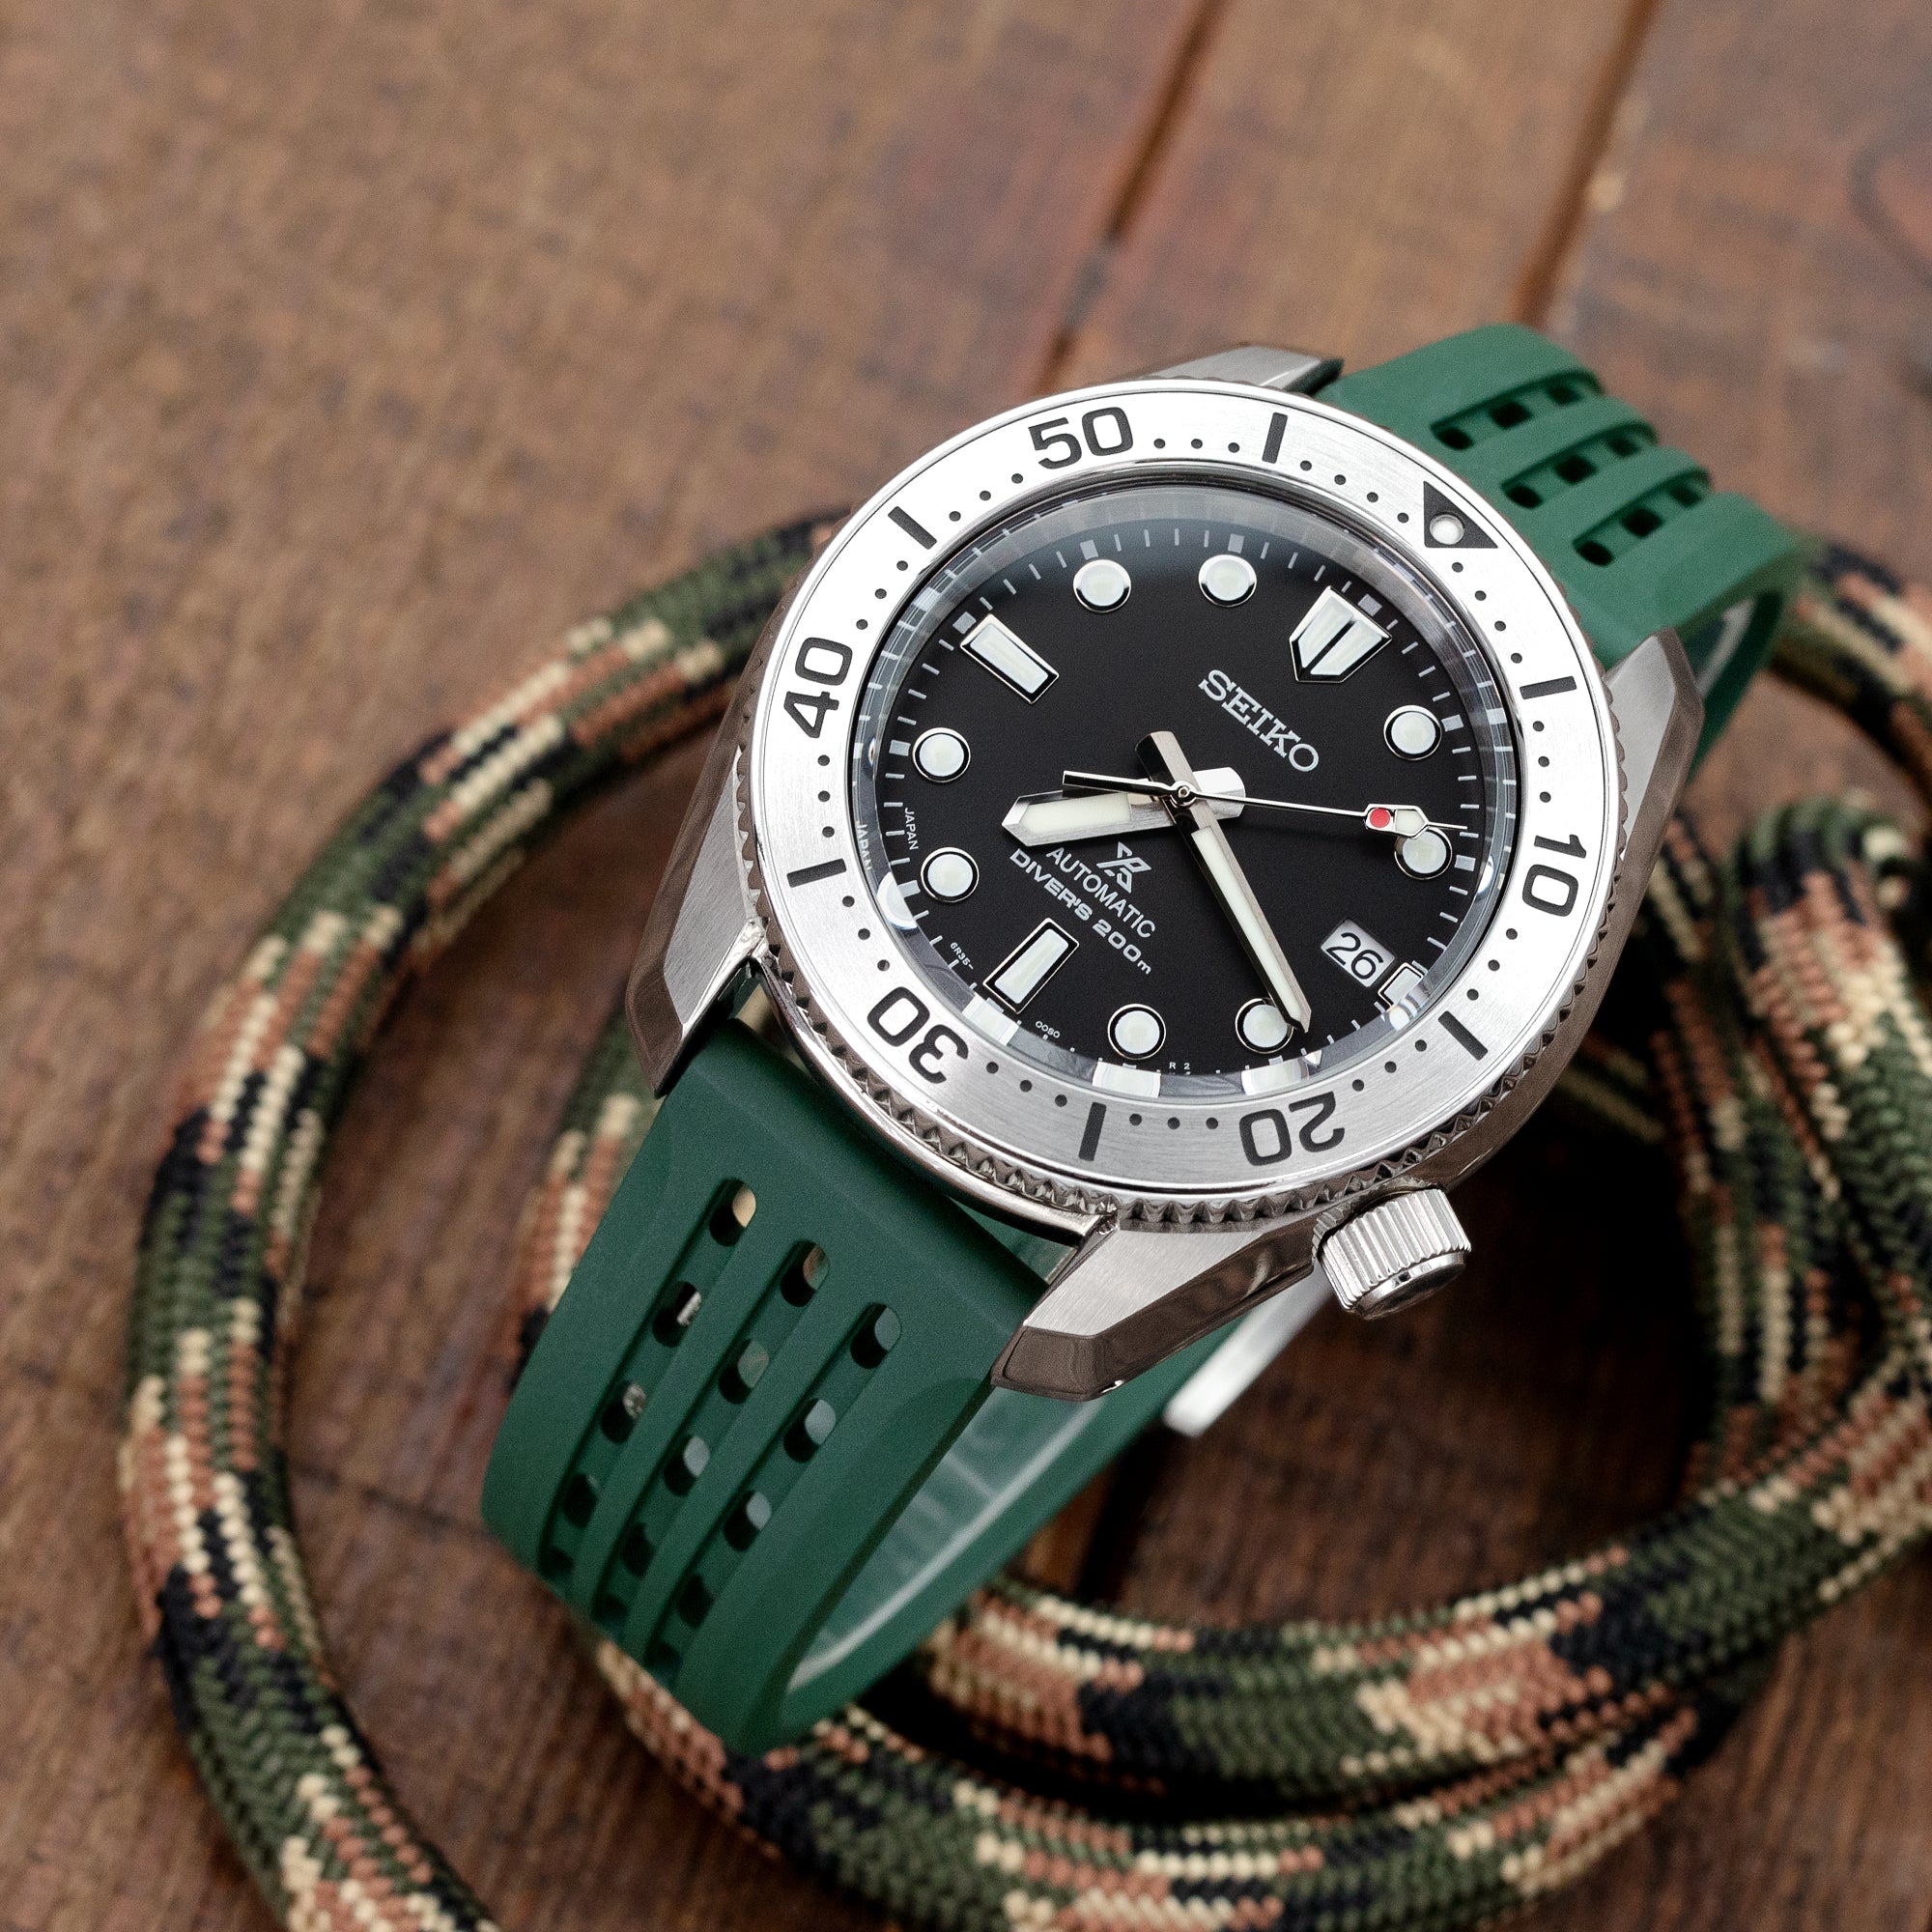 Seiko Prospex Automatic 1968 Diver Baby Marinemaster SPB185 watch band by Strapcode